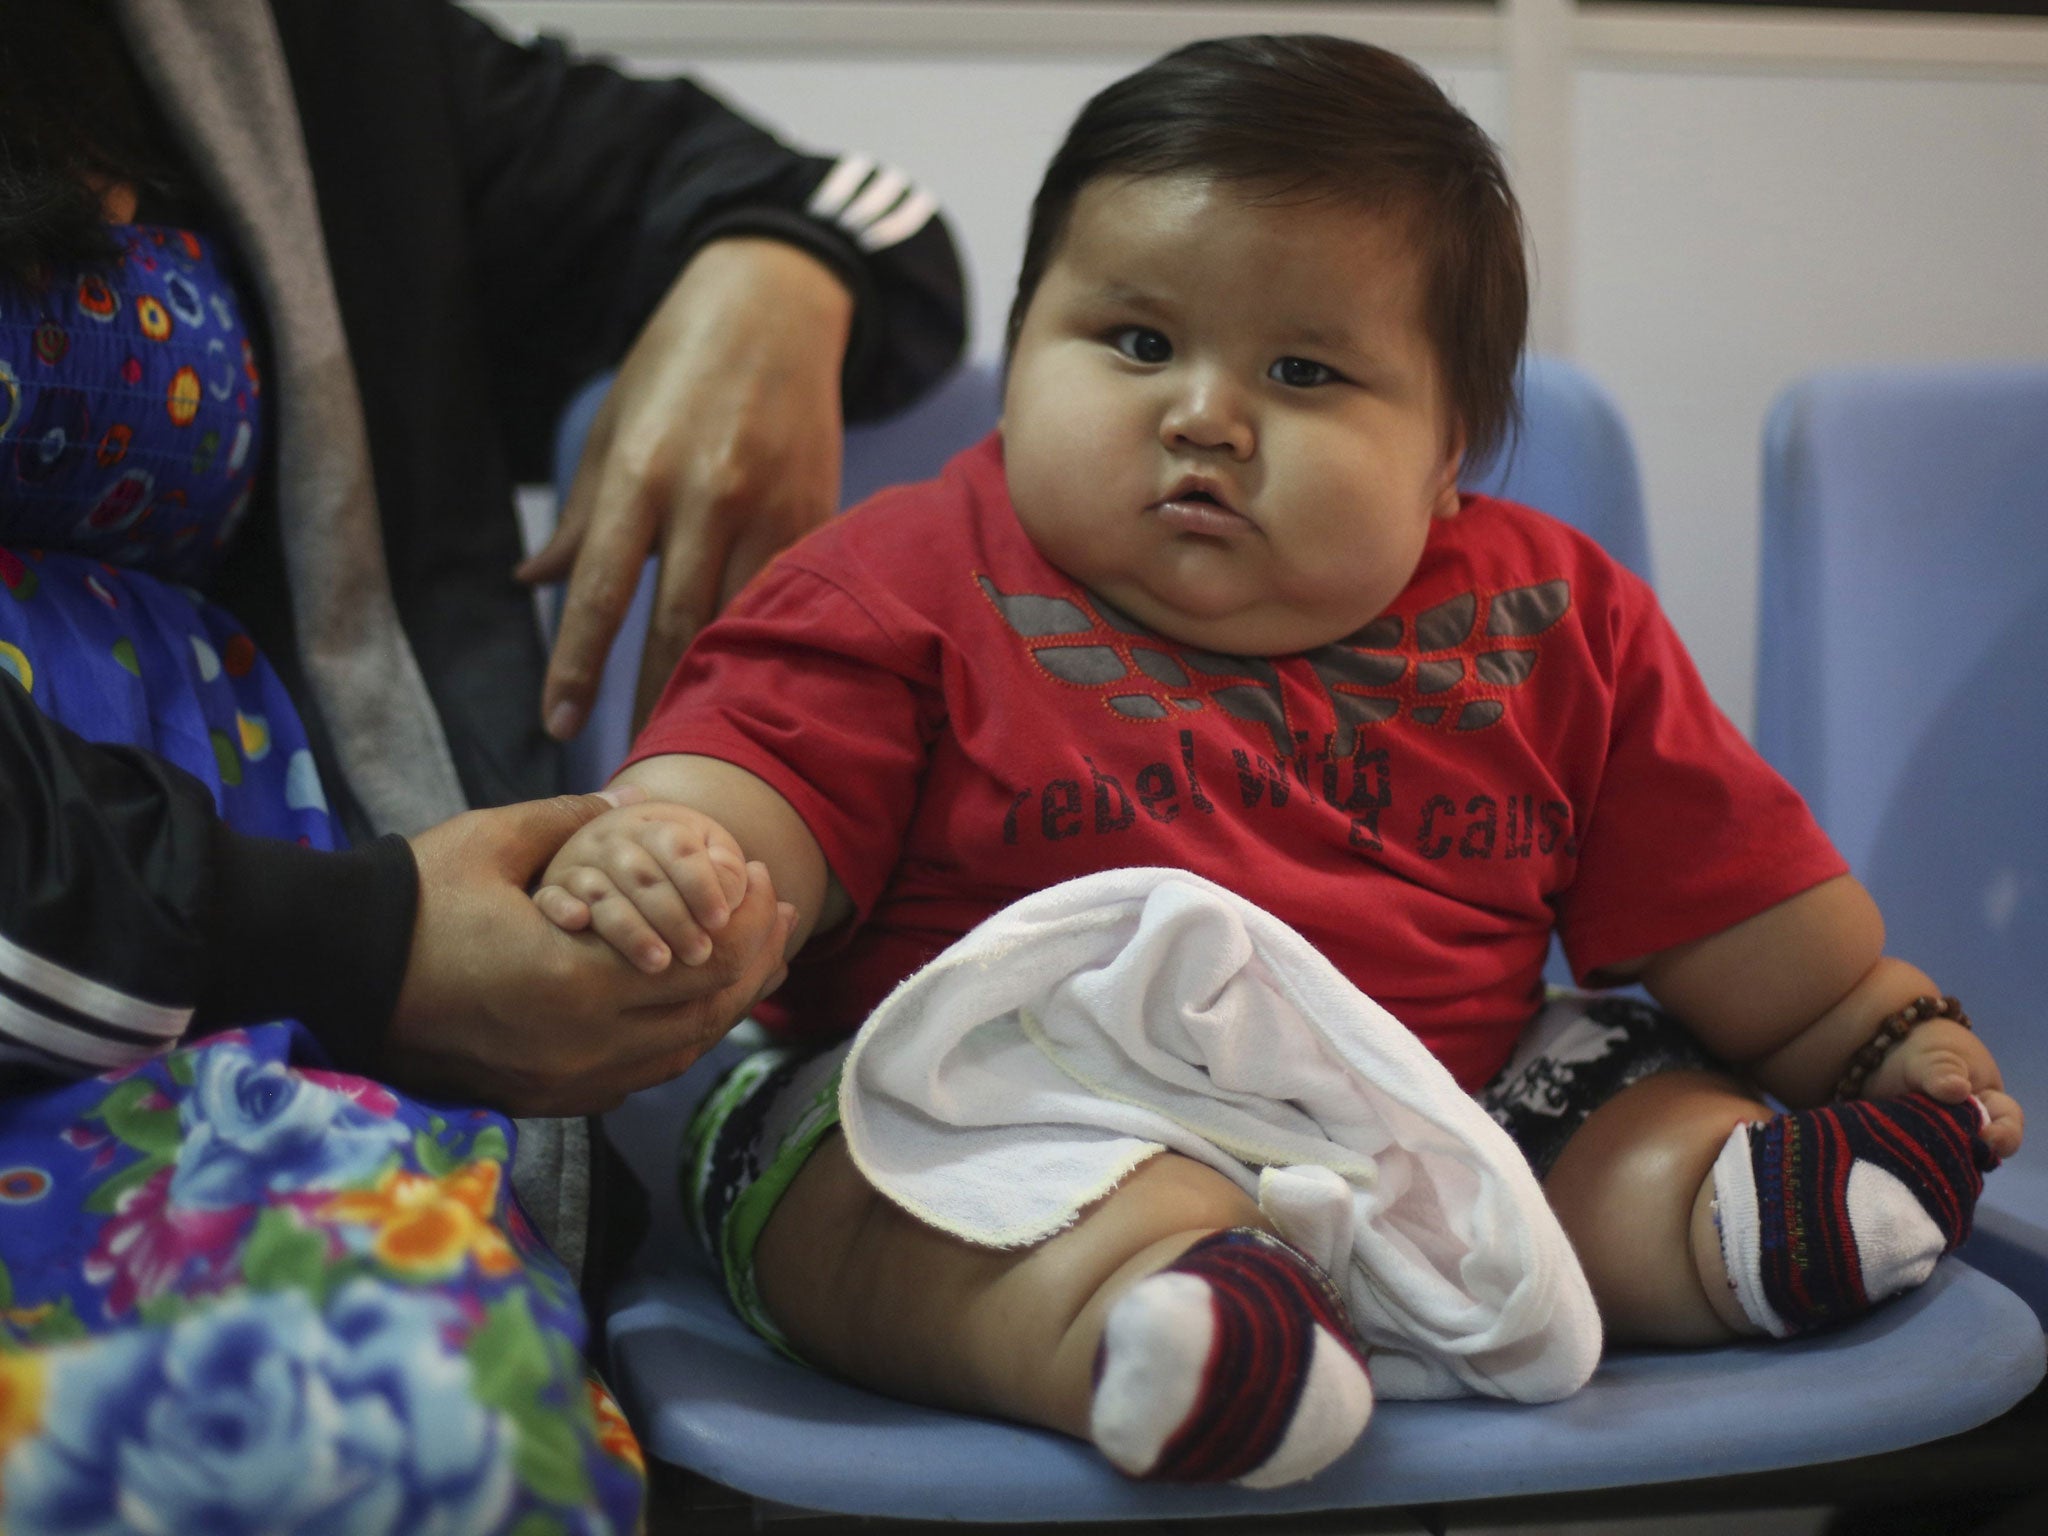 Tipping the scales at over 3st 8-month-old Santiago Mendoza weighs the same as an average six-year-old child, and weighs over three times more than he should, doctors have said.